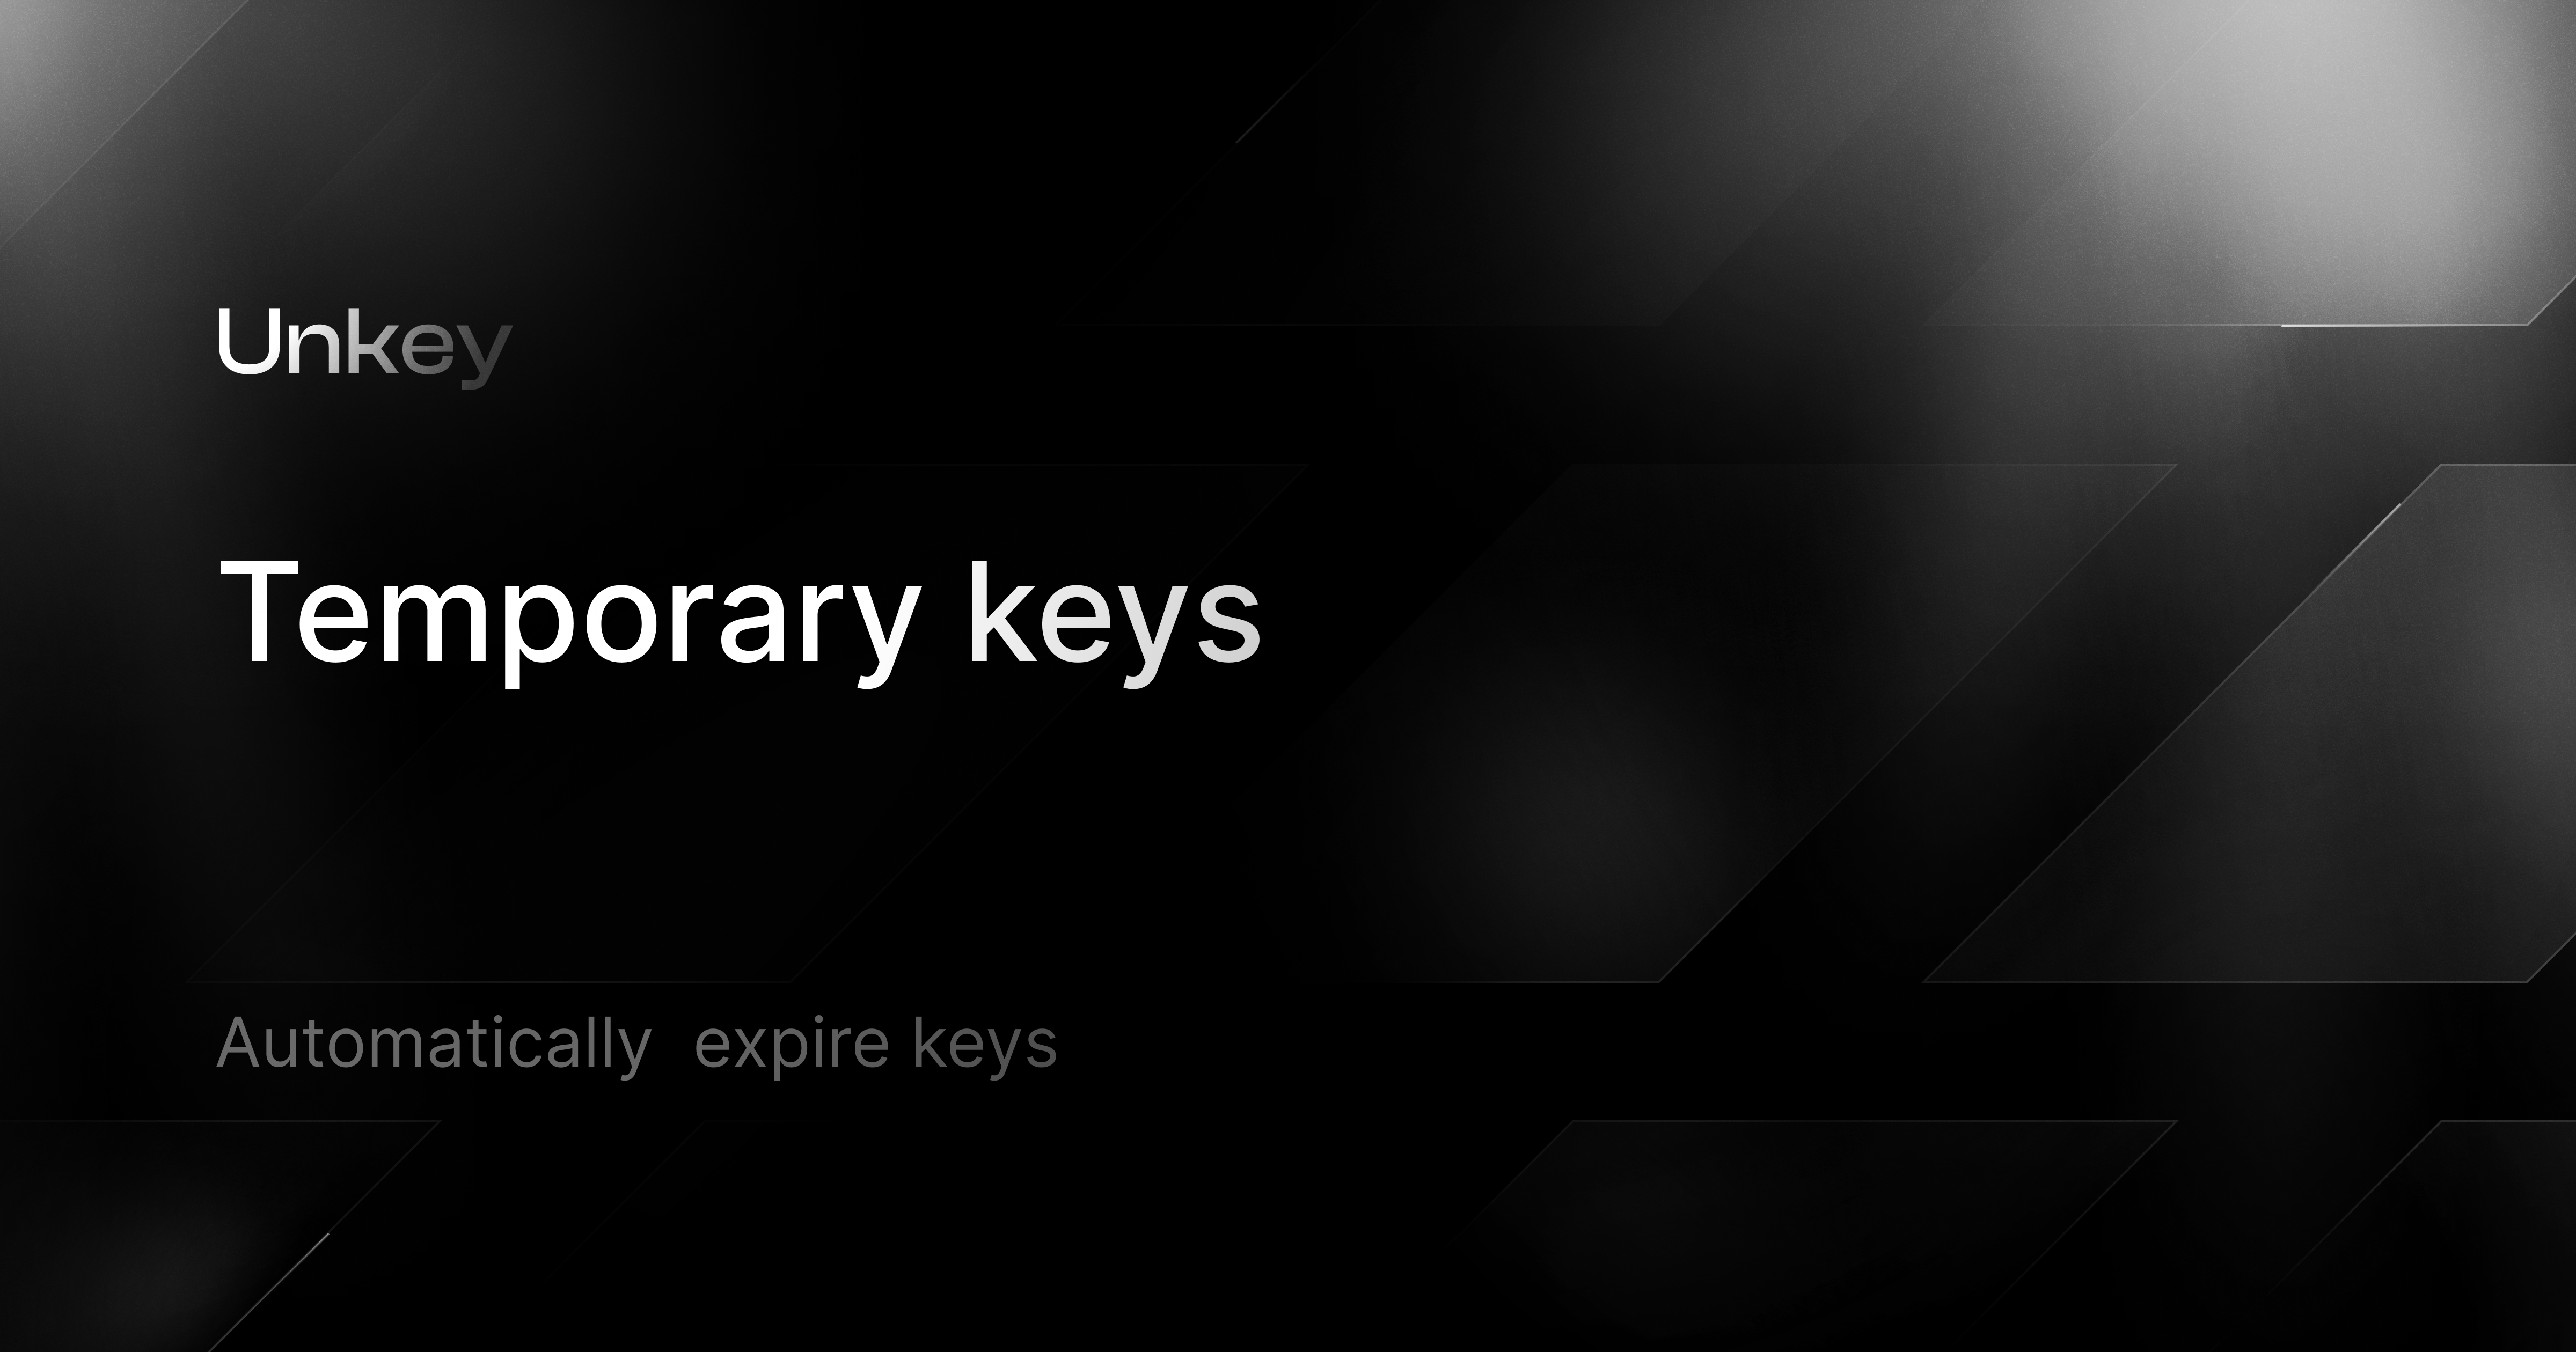 A simple Next.js app using Unkey to generate and verify API keys that expire after 60 seconds.